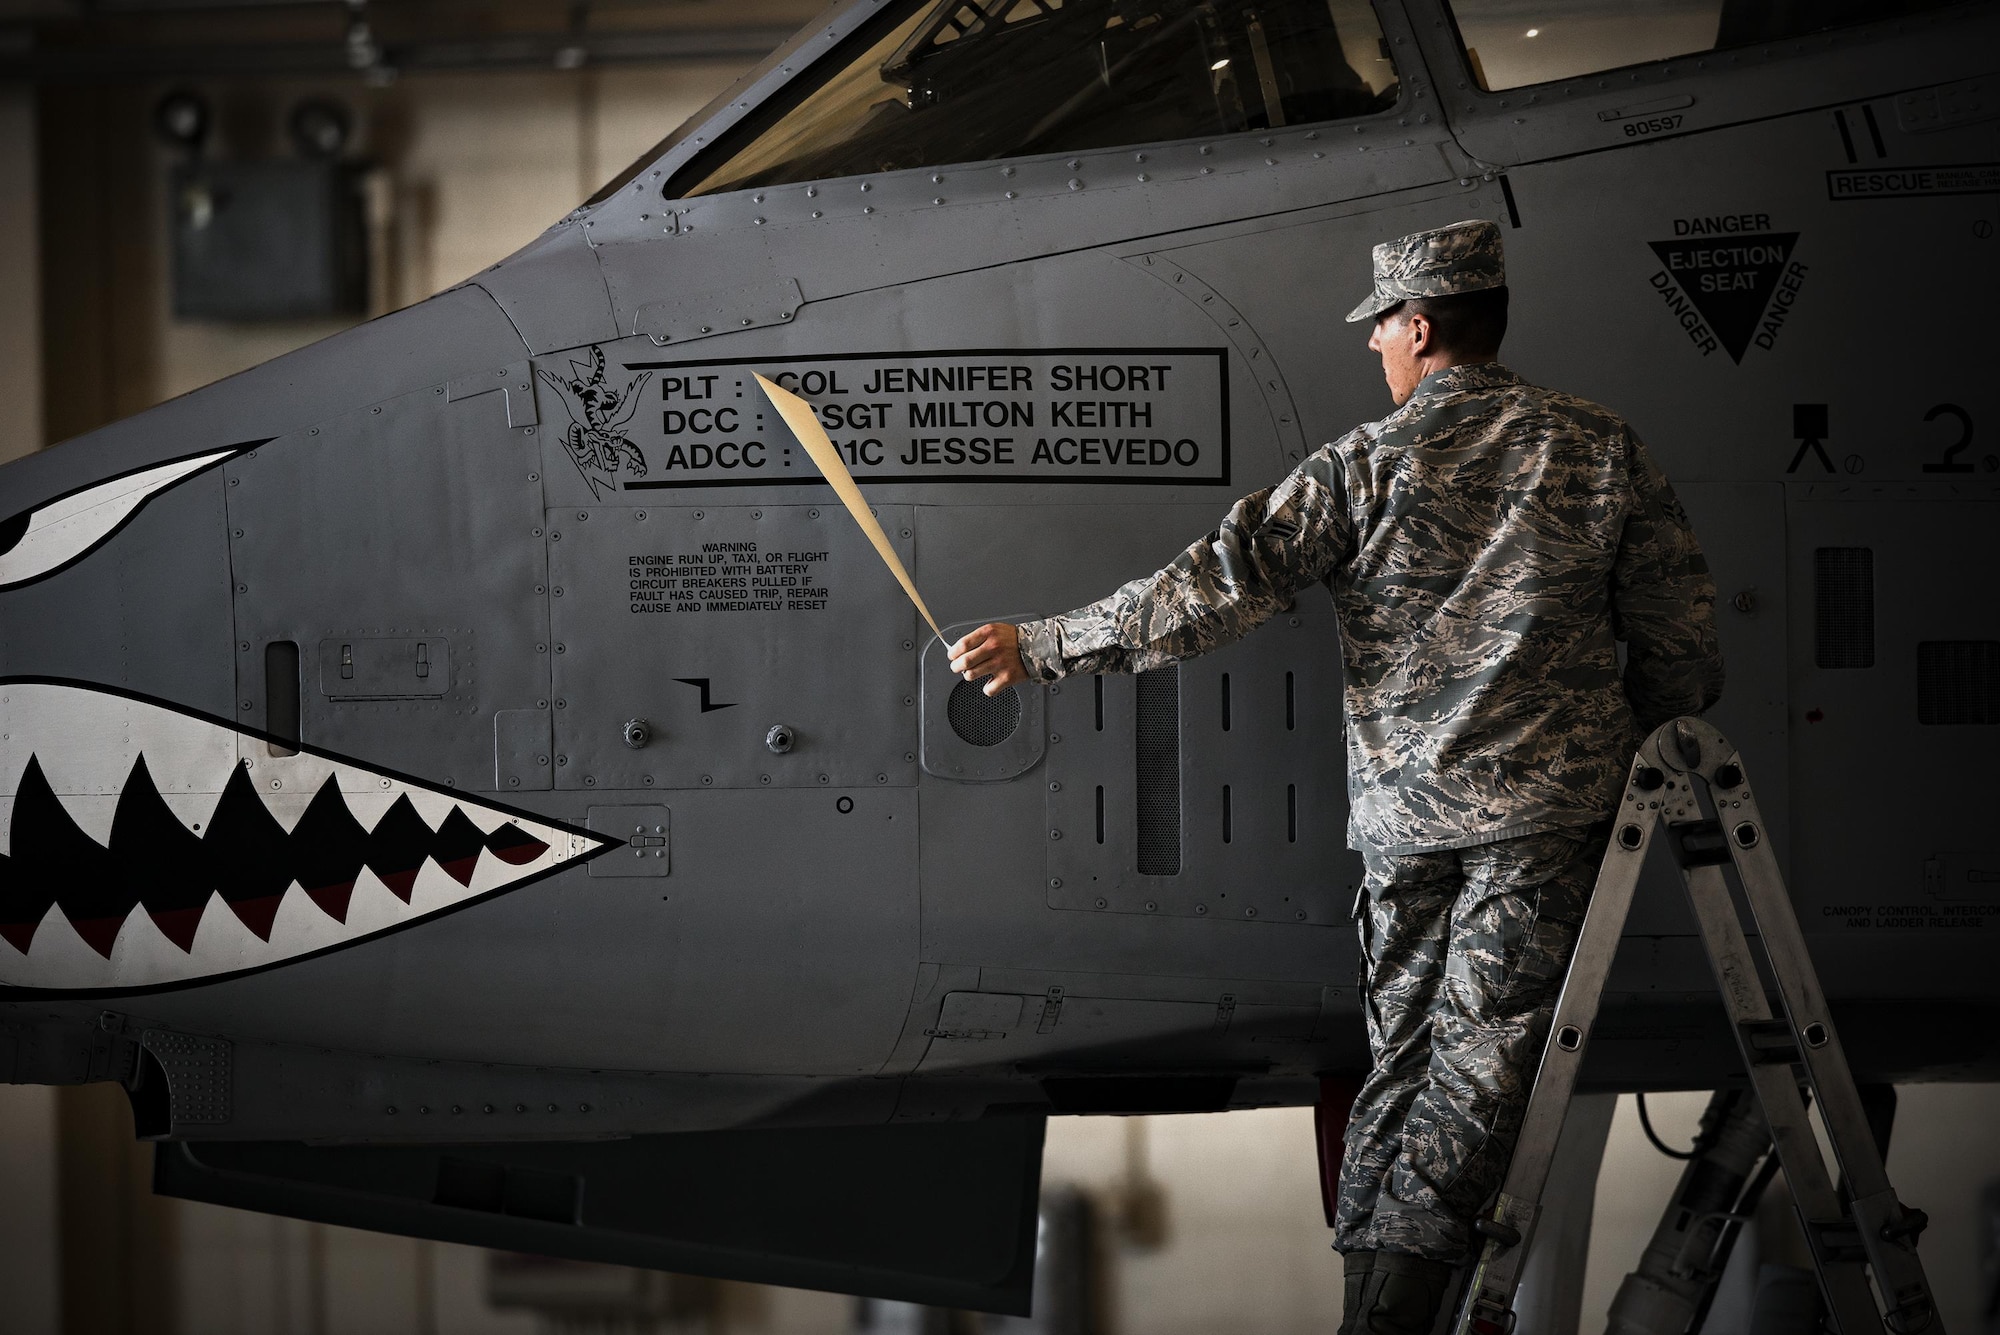 Airman 1st Class Jesse Acevedo, 75th Aircraft Maintenance Unit crew chief, reveals a name plate for Col. Jennifer Short, 23d Wing commander, during a change of command ceremony, July 10, 2017, at Moody Air Force Base, Ga. This ceremony marked the first time a female will command the unit and the first time a fighter pilot will command the 23d Wing since its reactivation at Moody in 2006. (U.S. Air Force photo by Staff Sgt. Ryan Callaghan)